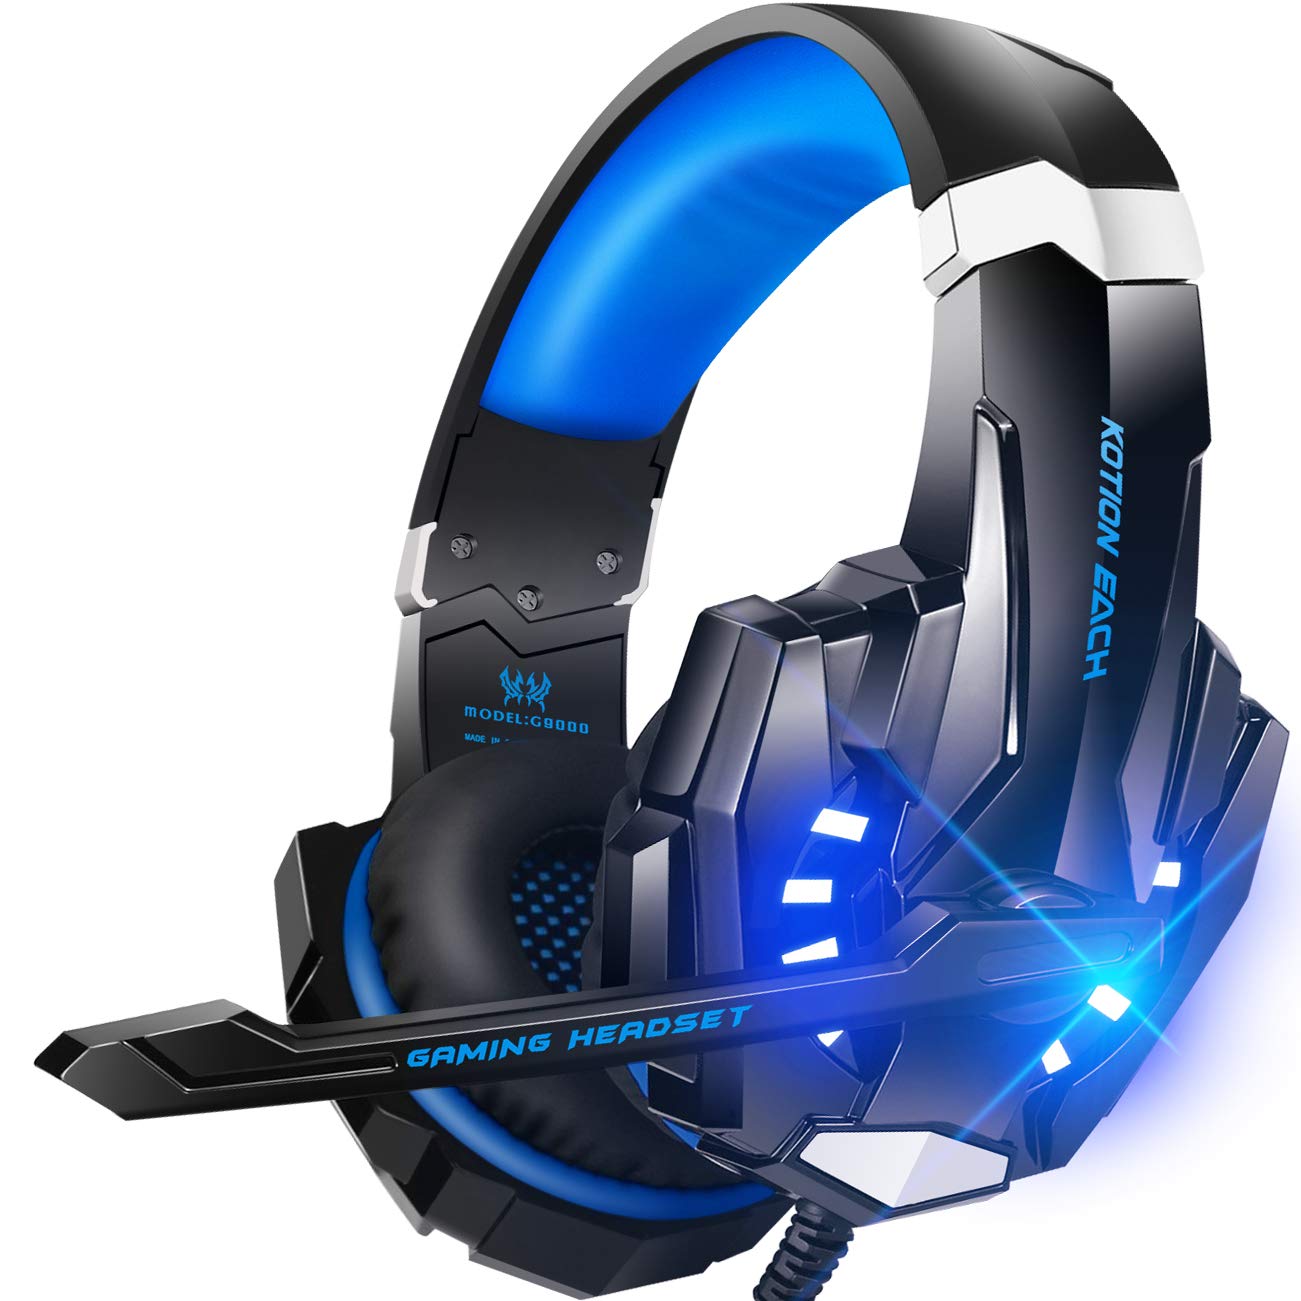 Top 8 Best Wired Gaming Headsets in 2021 - Reviews and Comparison